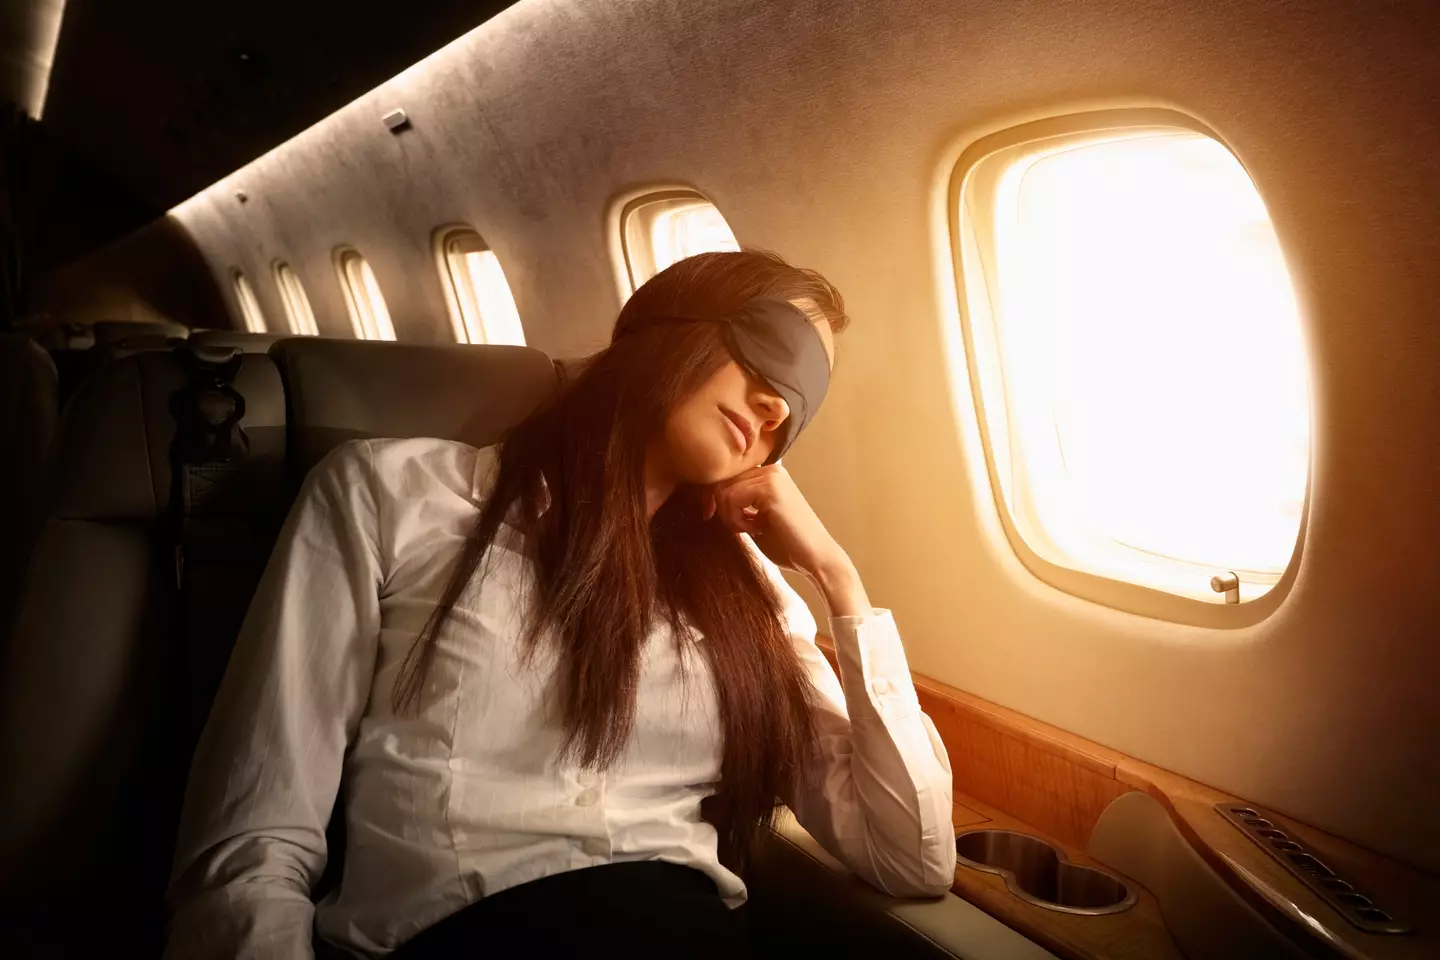 Many people suffer from jet-lag following long-haul flights.